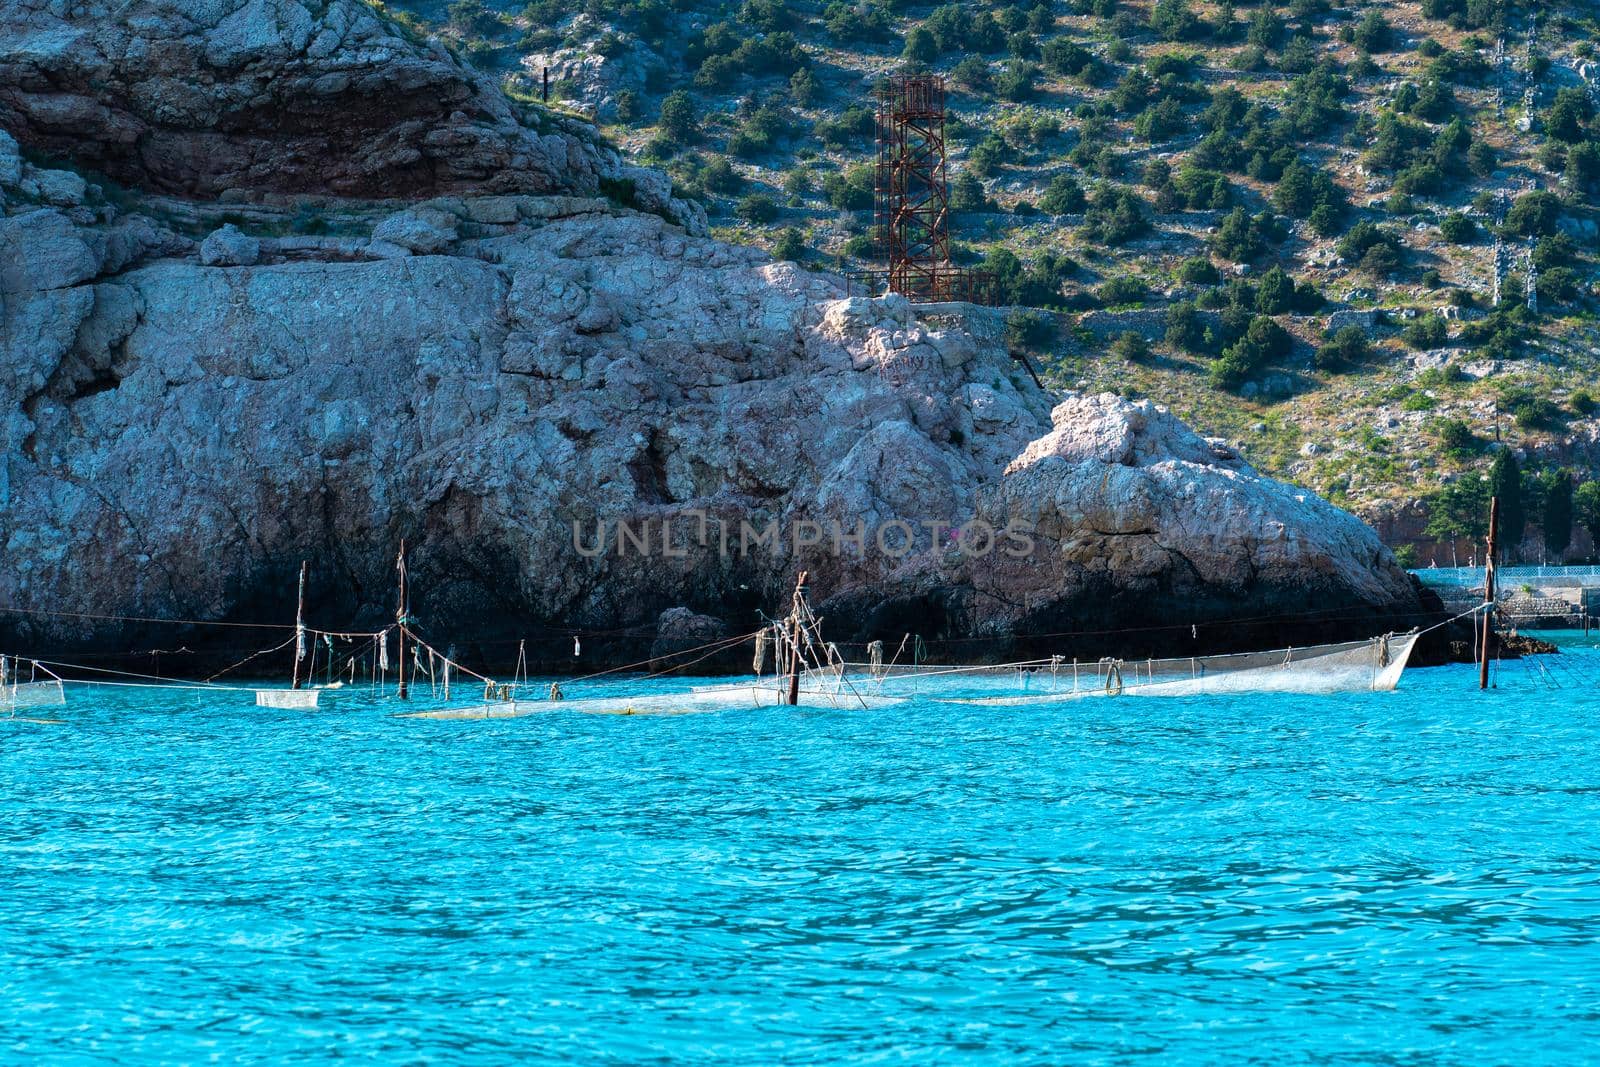 Network crimea cembalo bay fortress balaklava flying balaclava mountain rock, for sea landscape in travel from hill boat, europe view. Background marina stone, by 89167702191